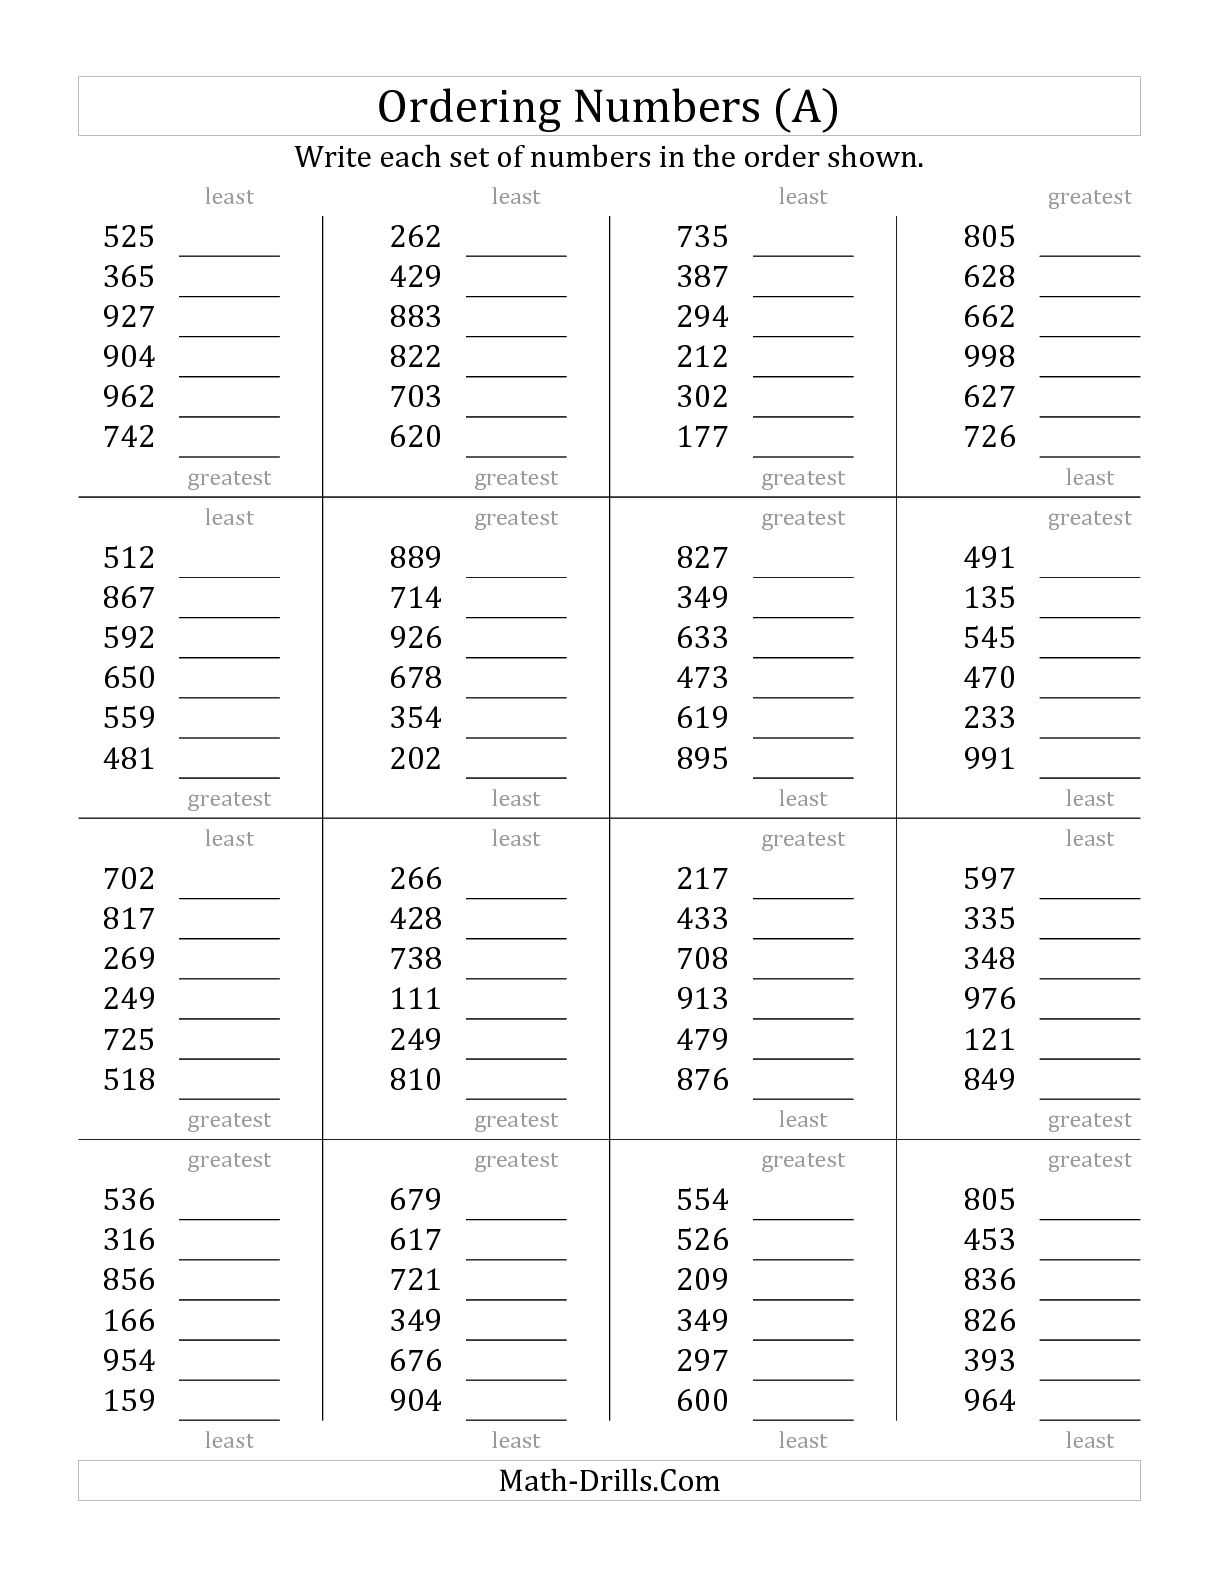 Fractions On A Number Line 3rd Grade Worksheets Along with Number Line 0 to 1 by Tenths Decimals Pinterest ordering Fractions